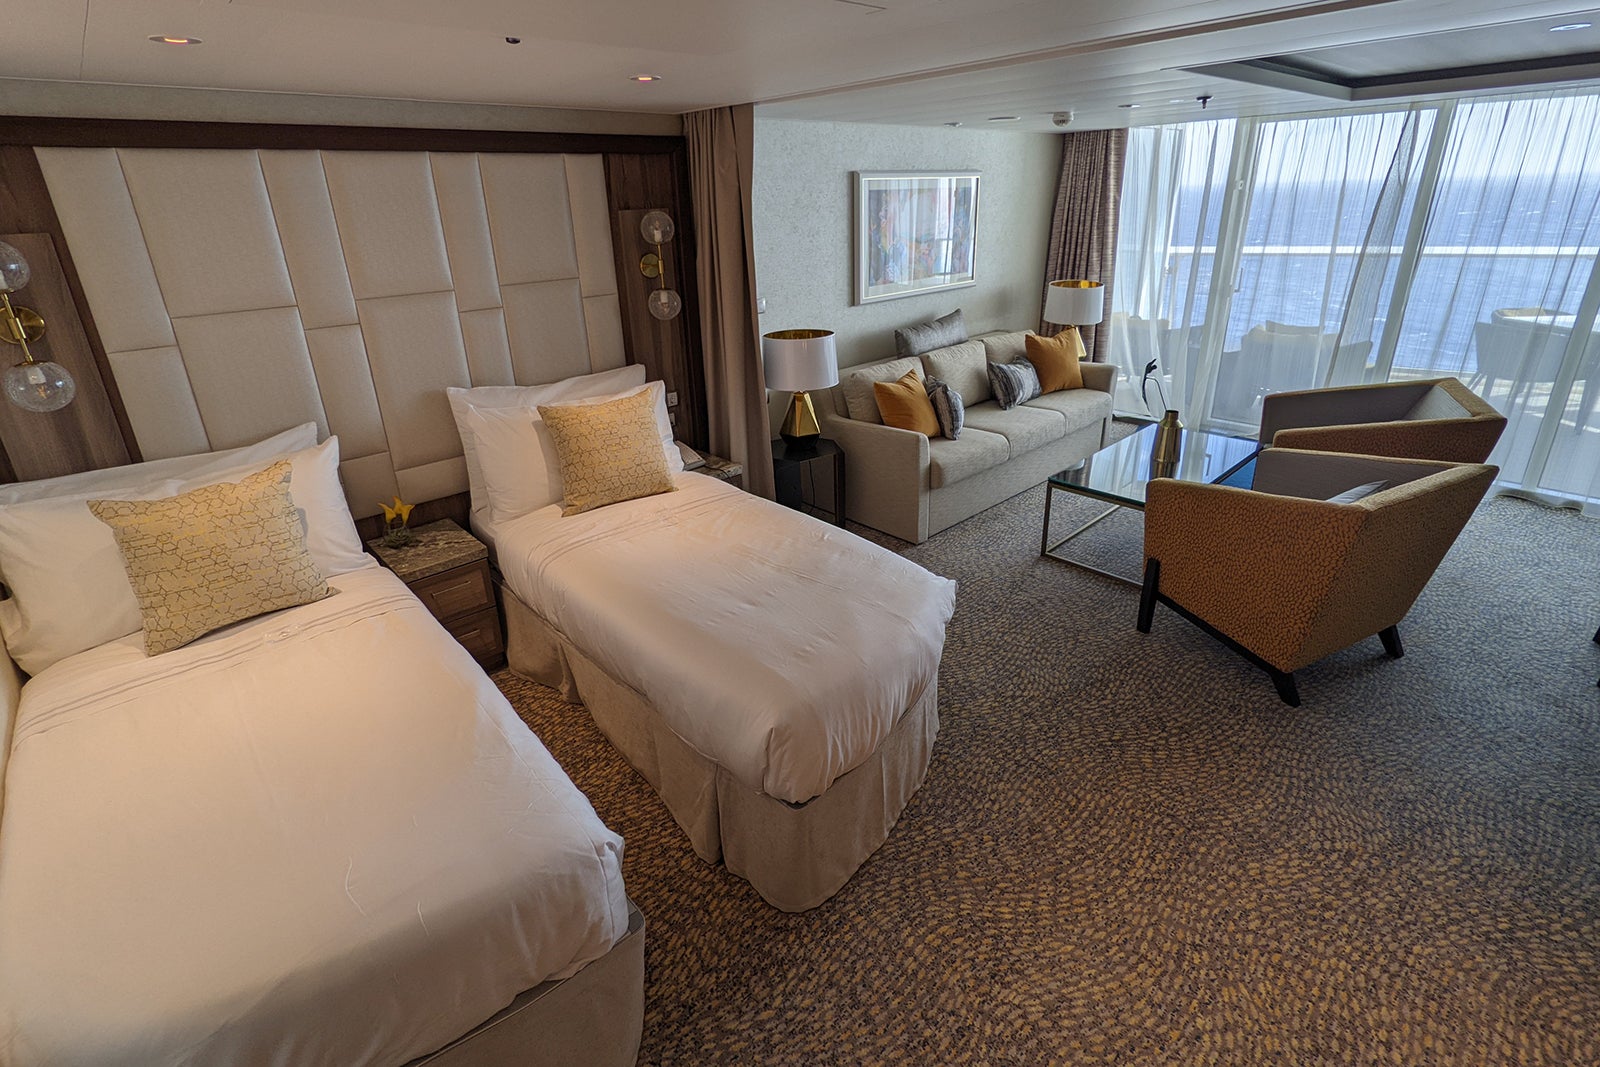 Quantum of the Seas: Balcony Stateroom Review - The MileLion